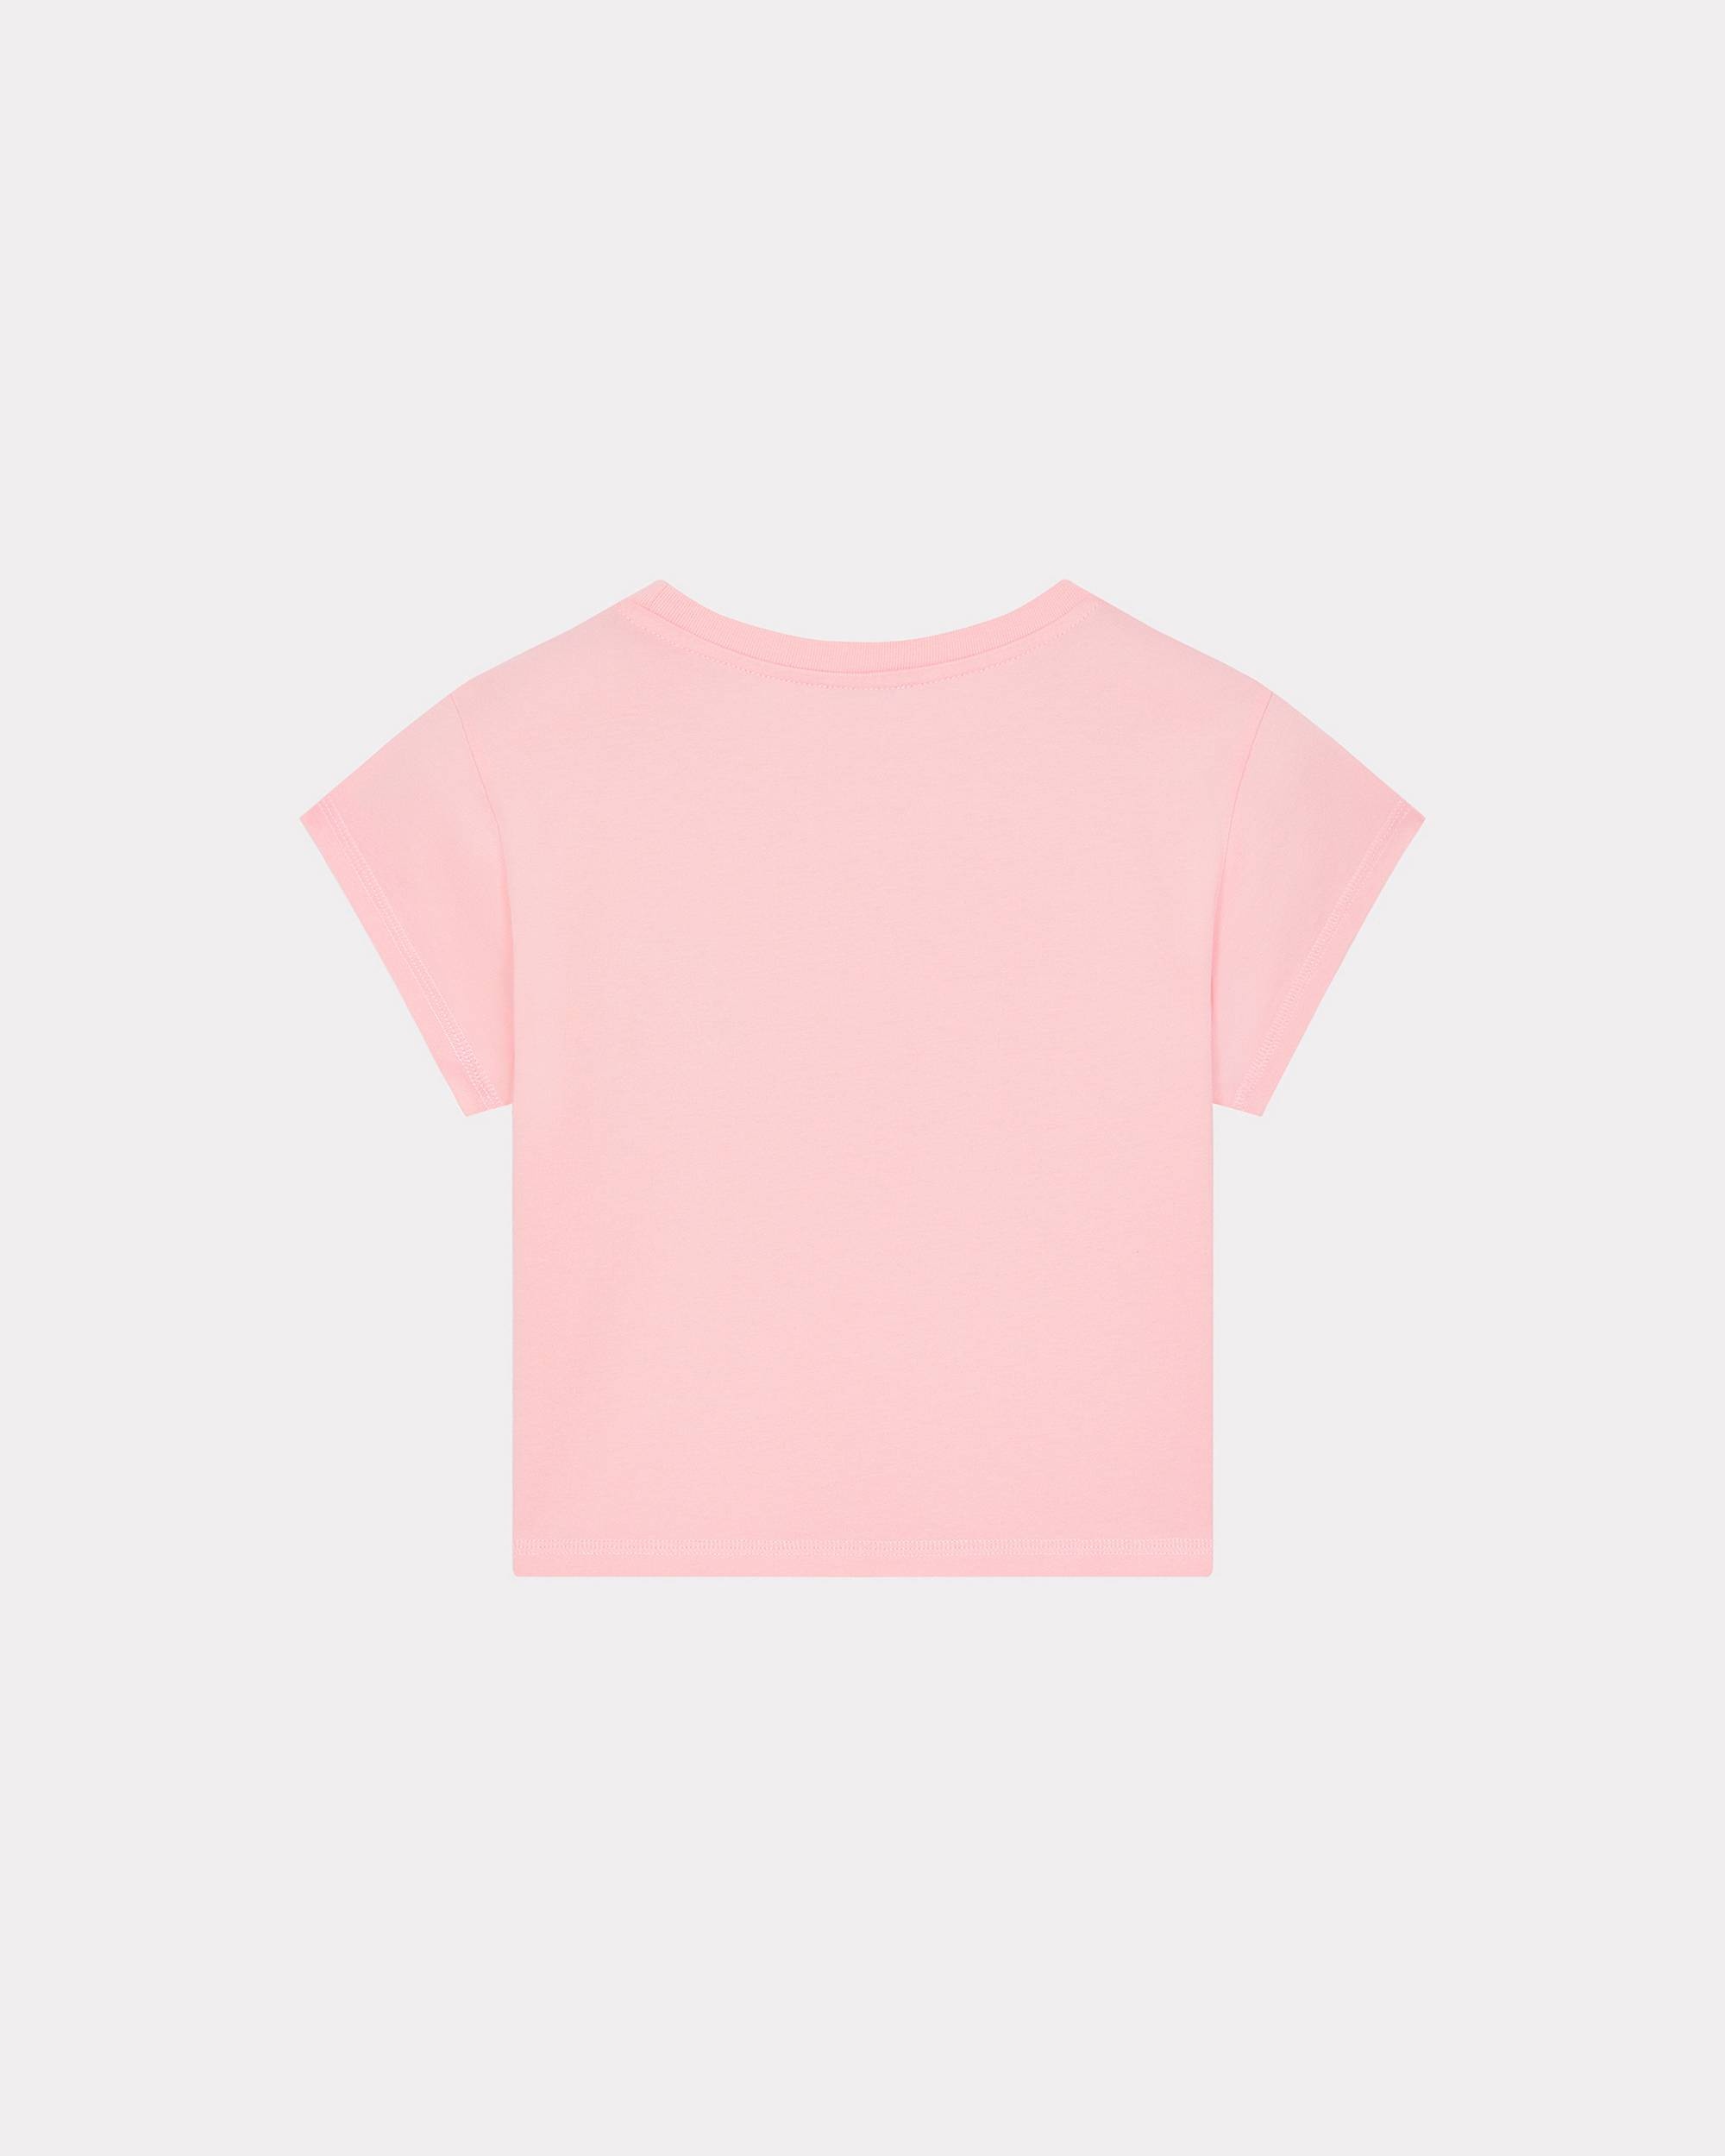 'Boke Flower Crest' micro-embroidered T-shirt - 2